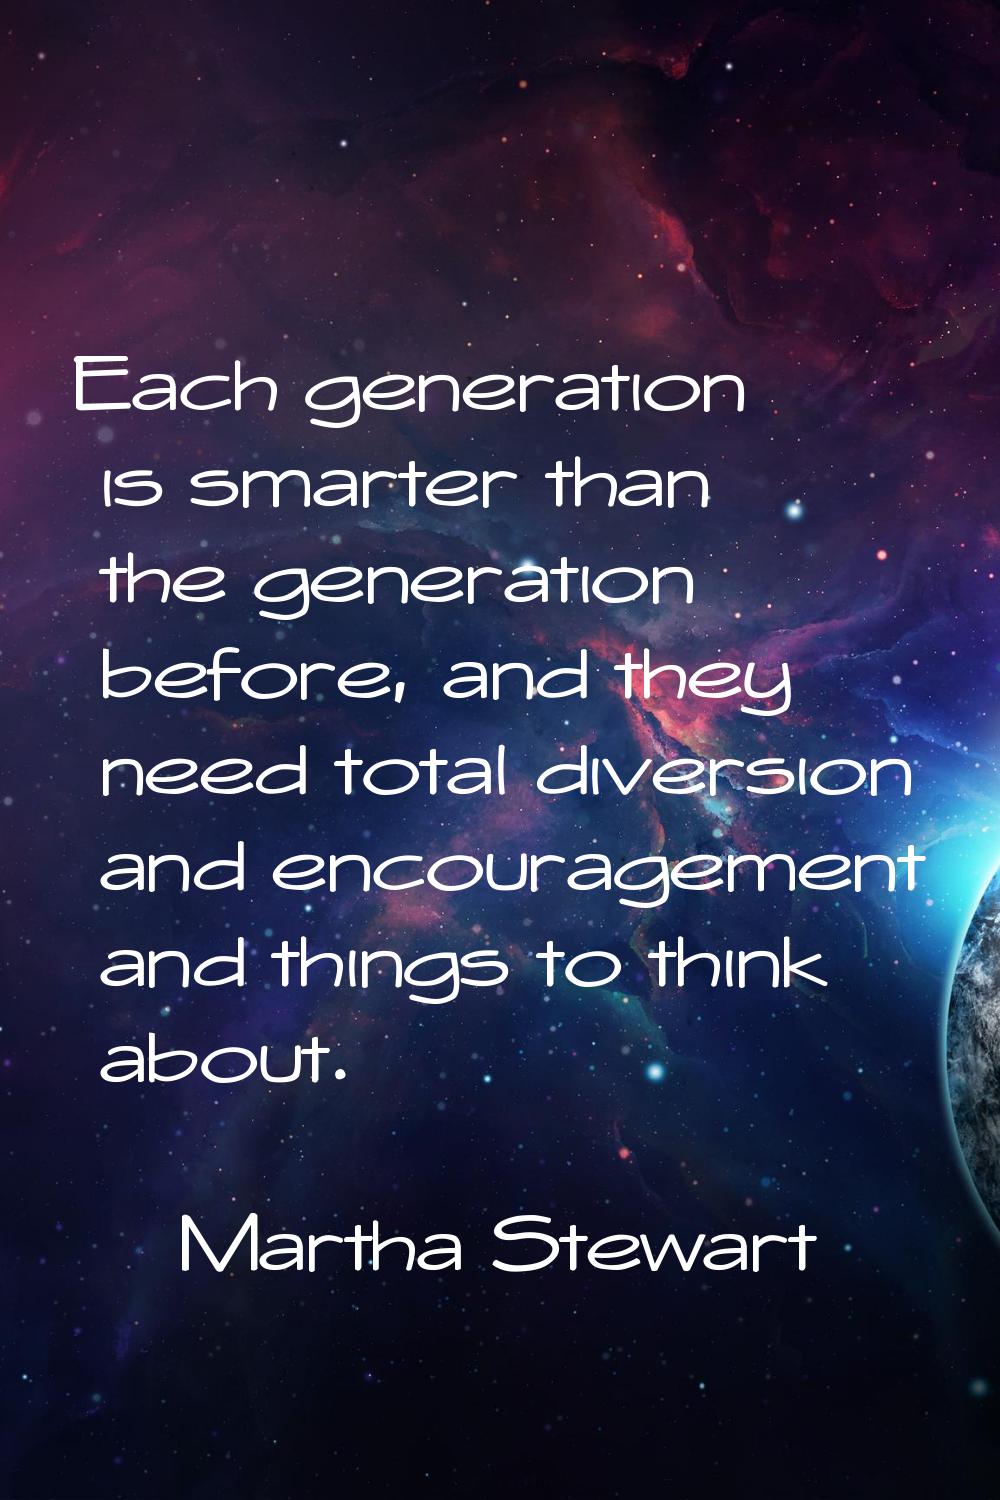 Each generation is smarter than the generation before, and they need total diversion and encouragem